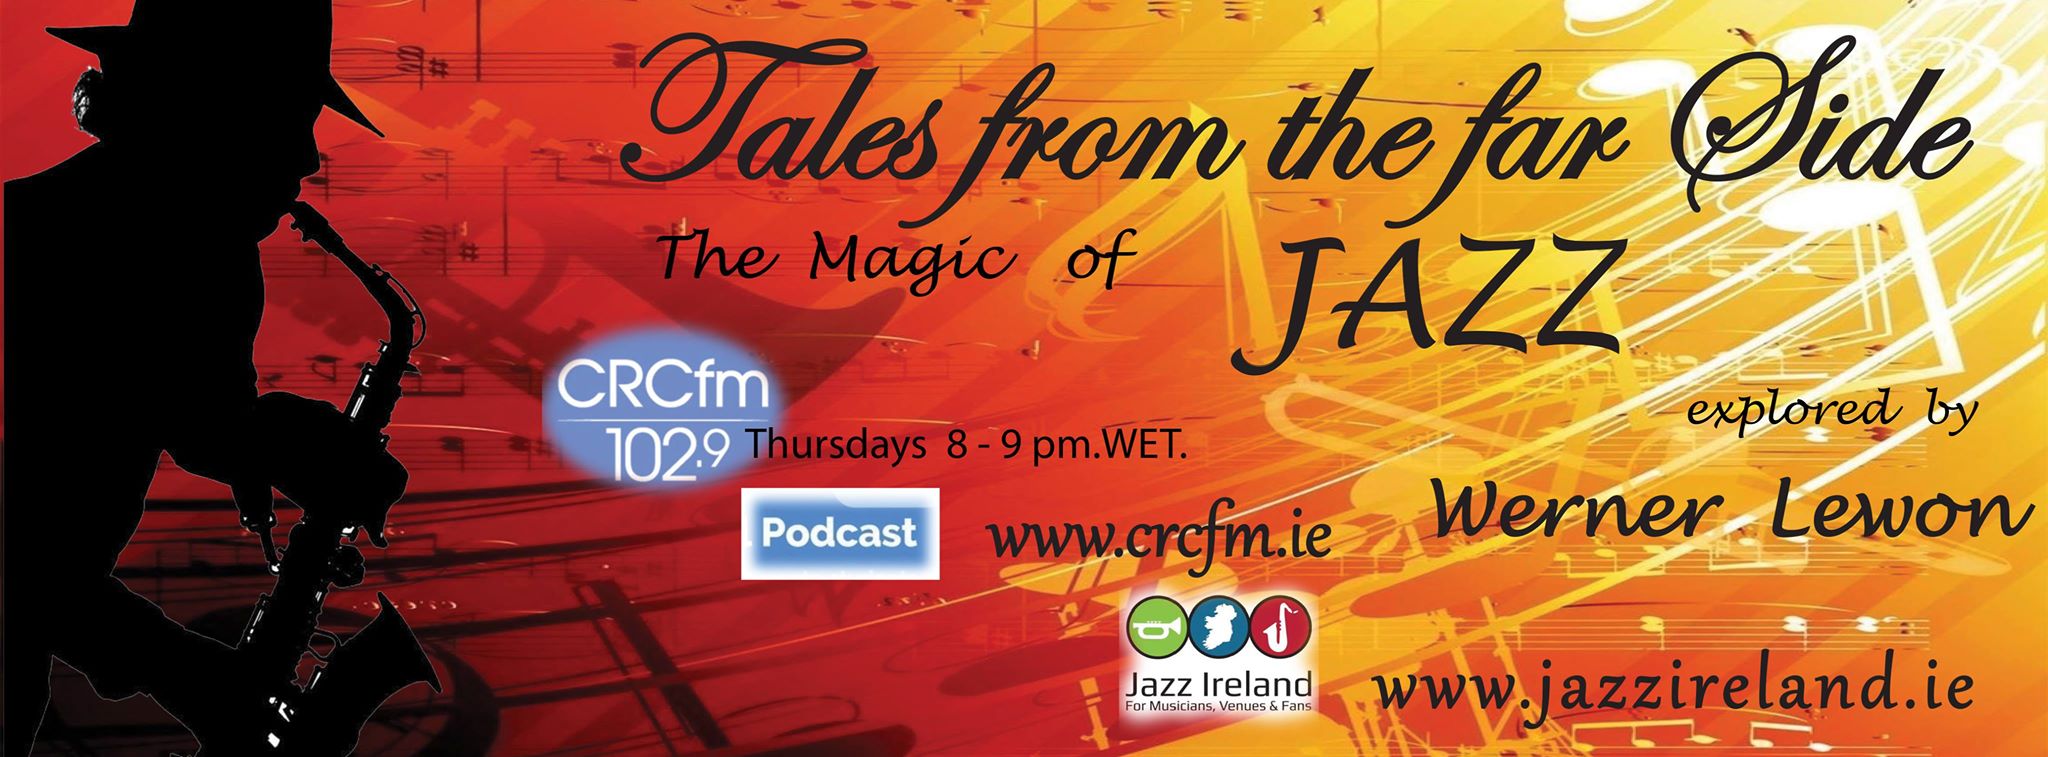 Tales from the far Side 04.04.2019 Jazz between the April showers